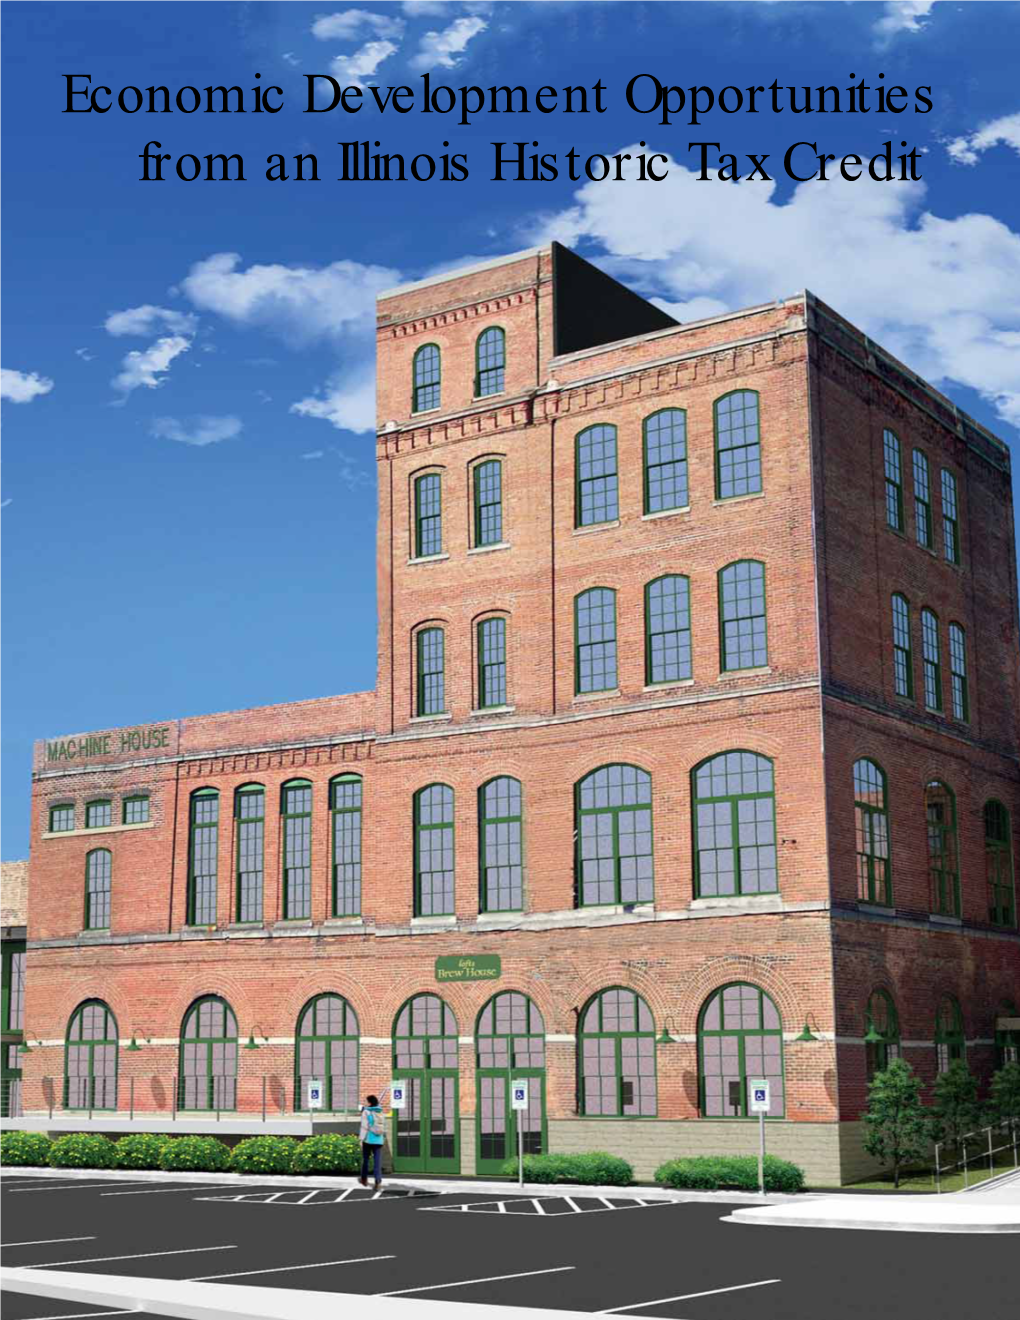 Report: Economic Development Opportunities from an Illinois Historic Tax Credit